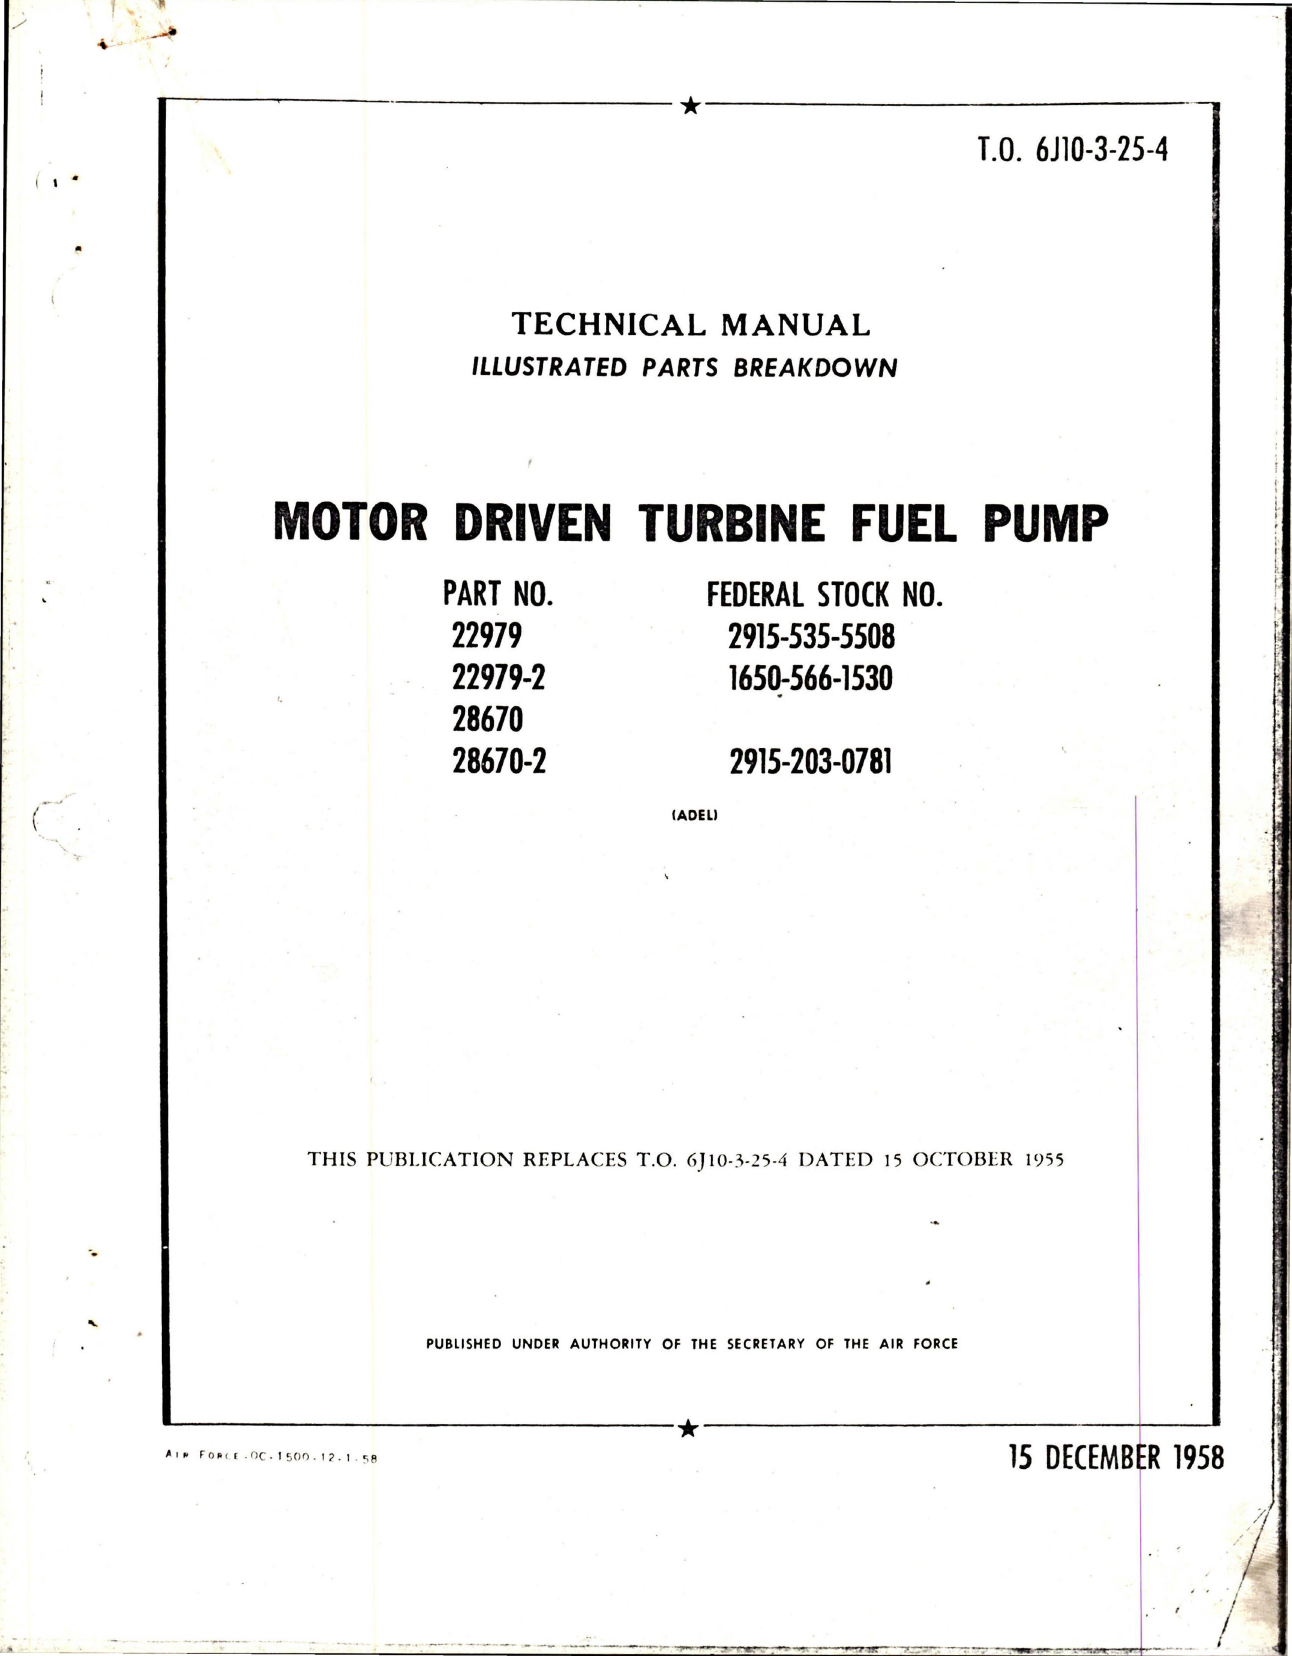 Sample page 1 from AirCorps Library document: Illustrated Parts Breakdown for Motor Driven Turbine Fuel Pump